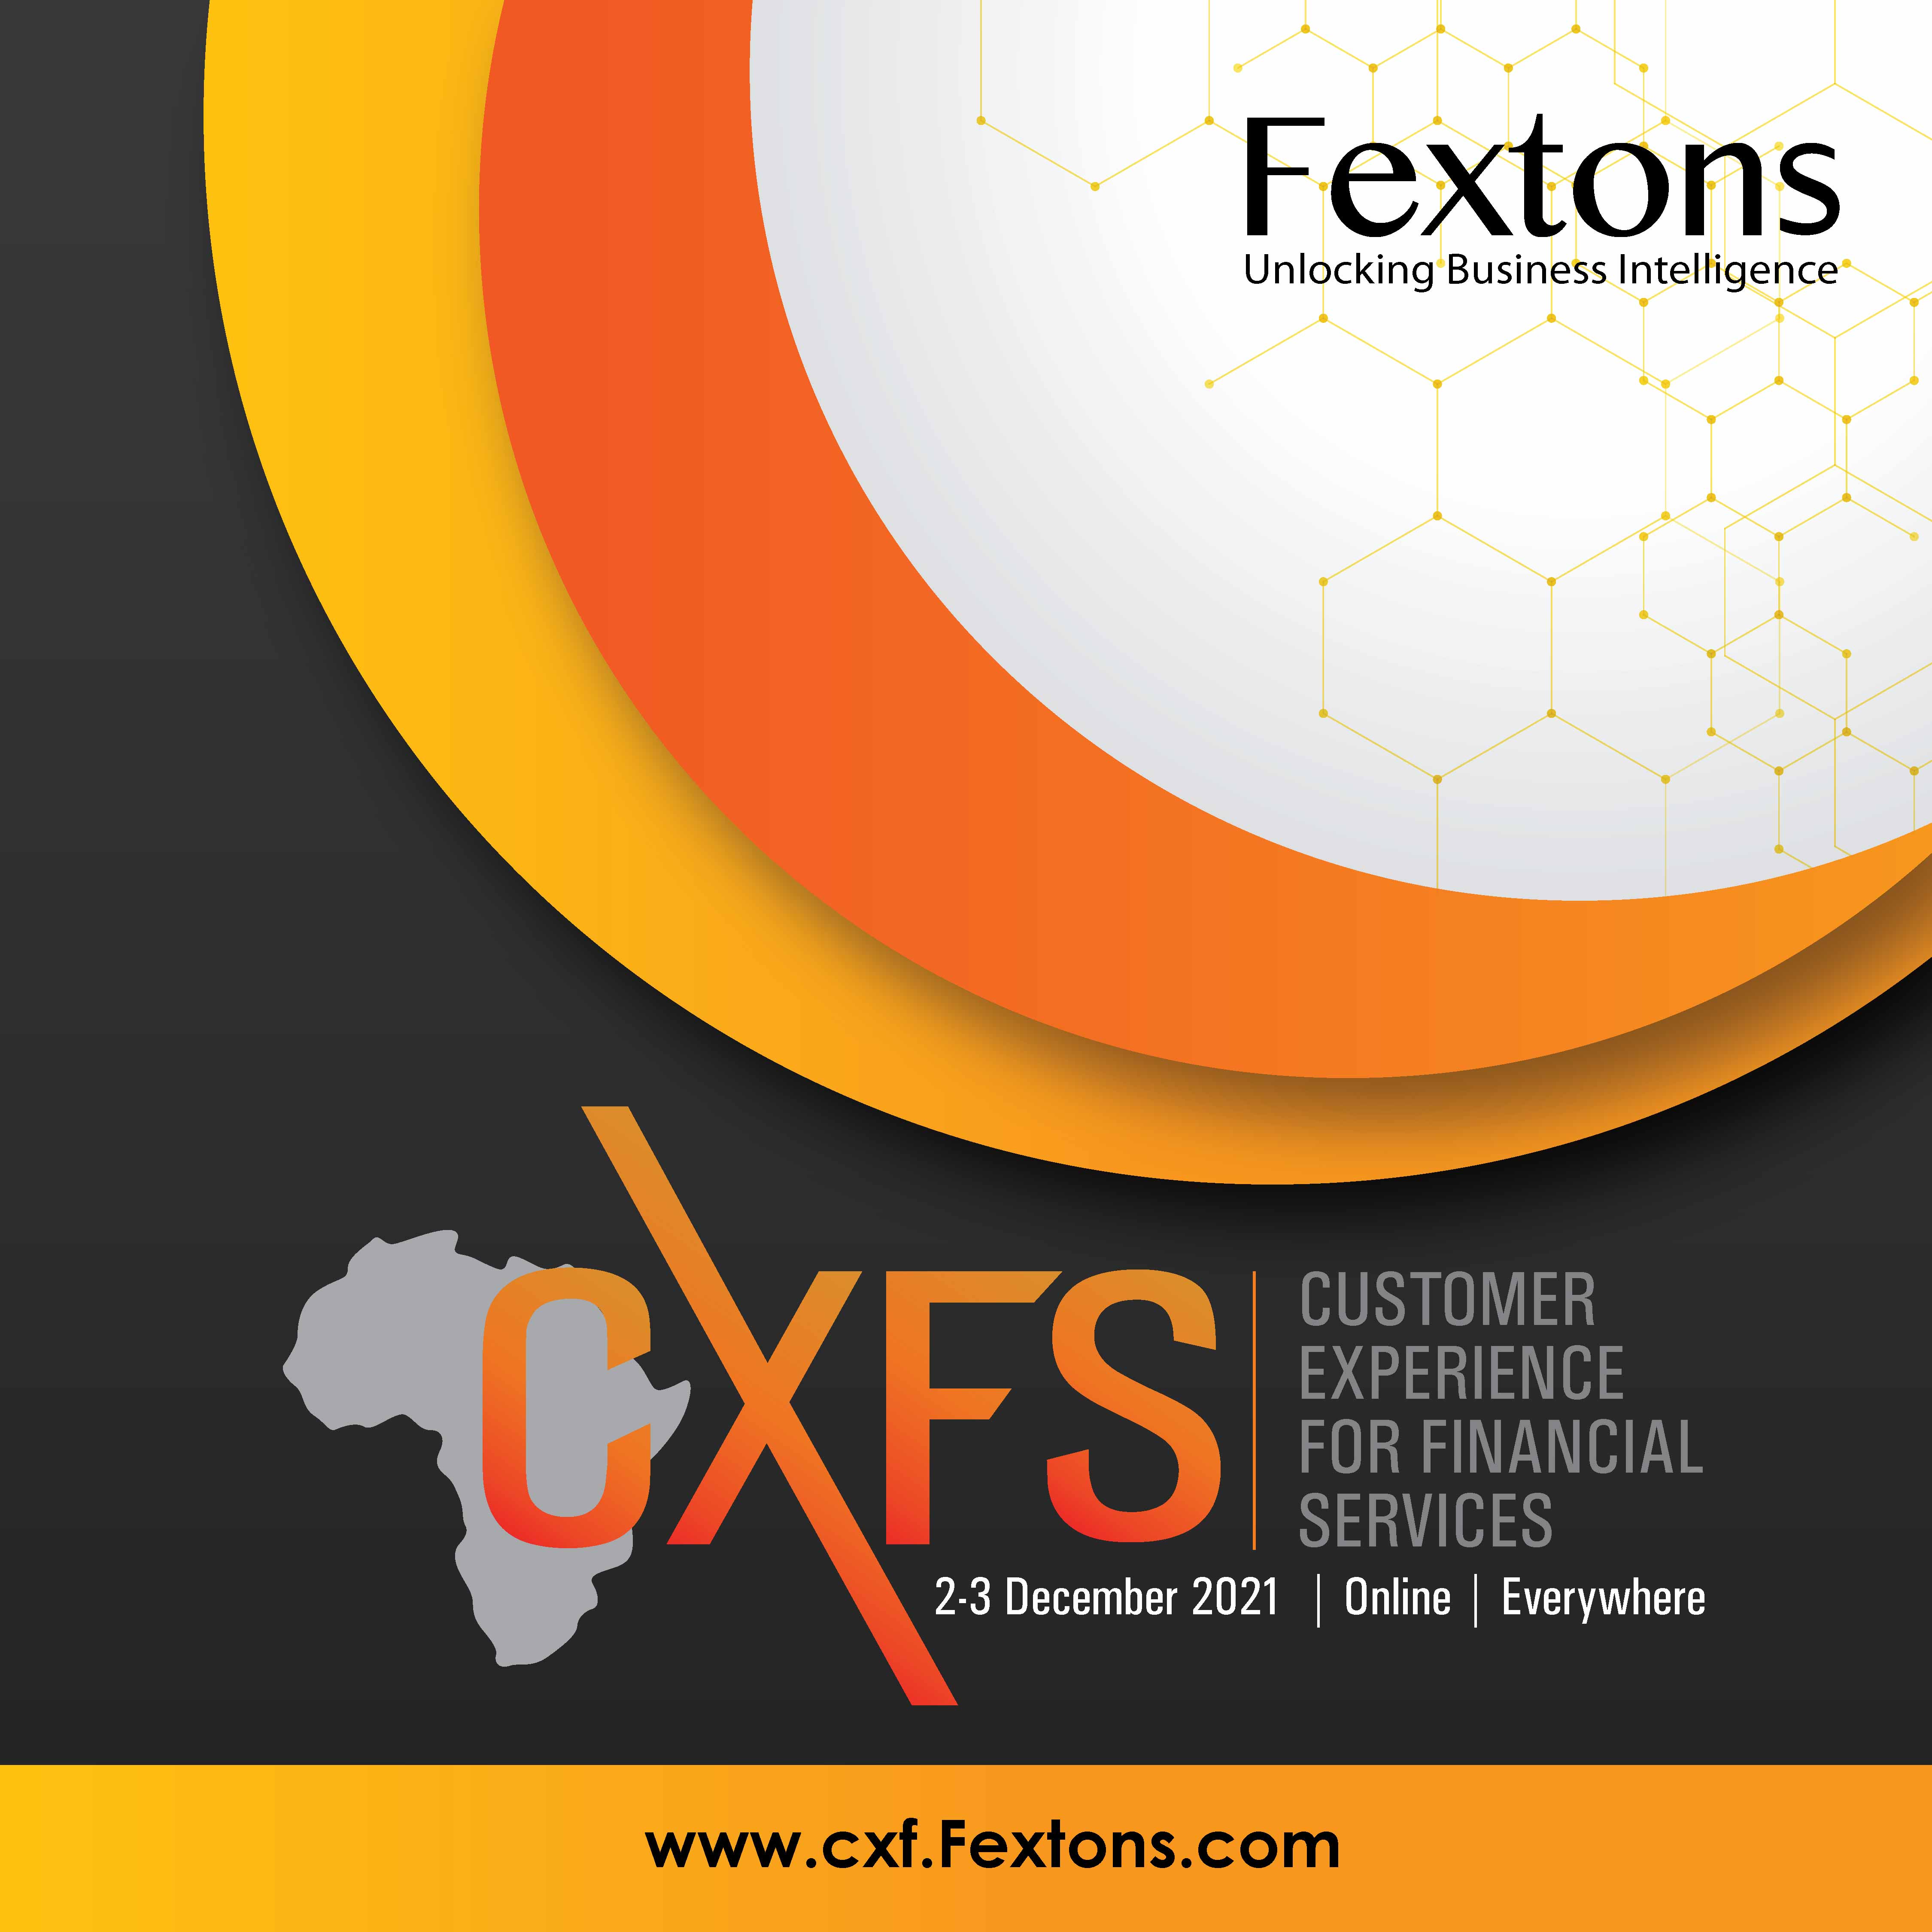 Customer Experience For Financial Services organized by Fextons